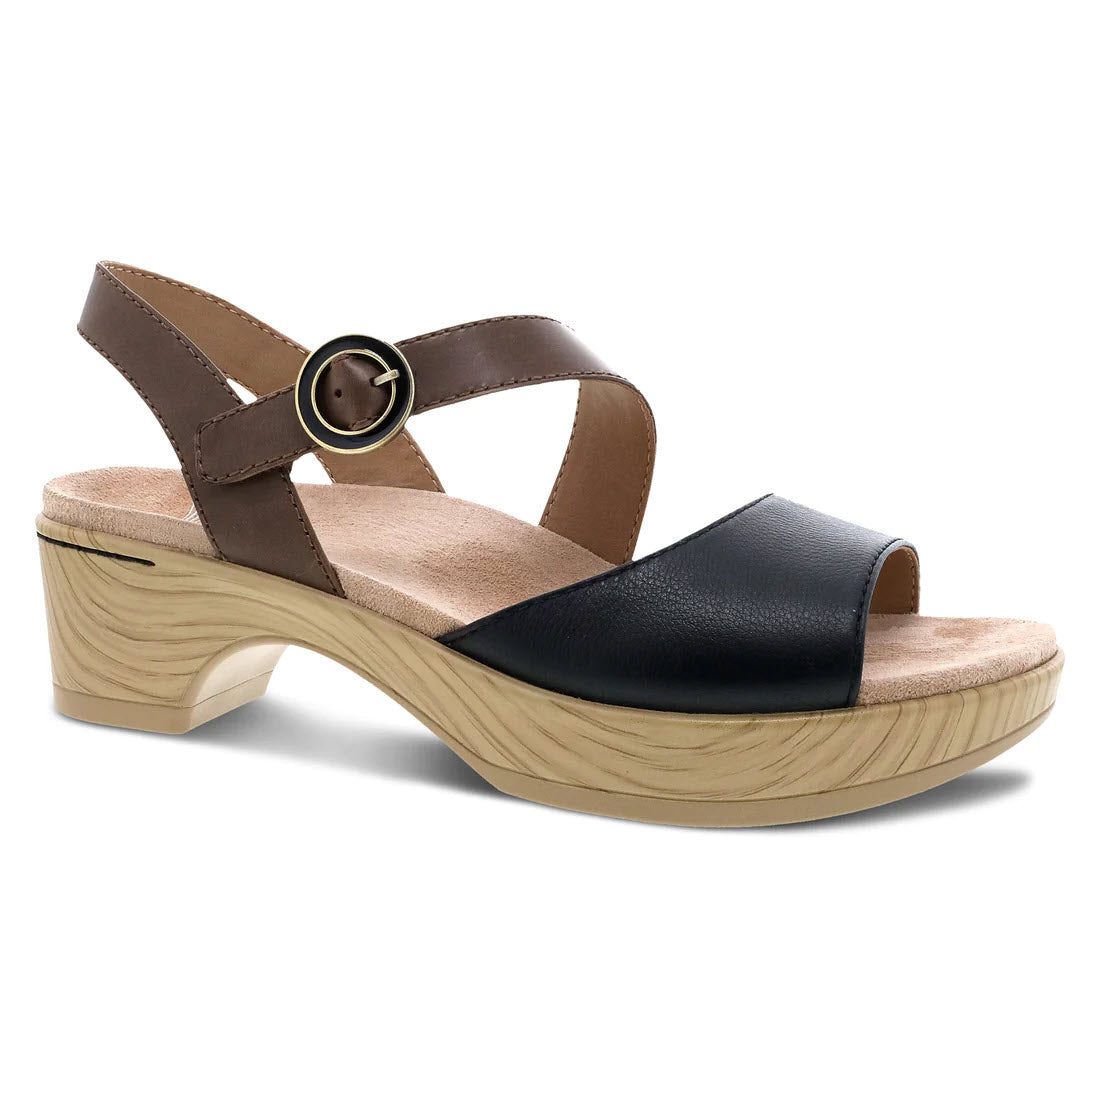 A Dansko women&#39;s black nappa leather sandal with asymmetrical black and tan straps, a circular buckle, and a wood-textured platform heel.